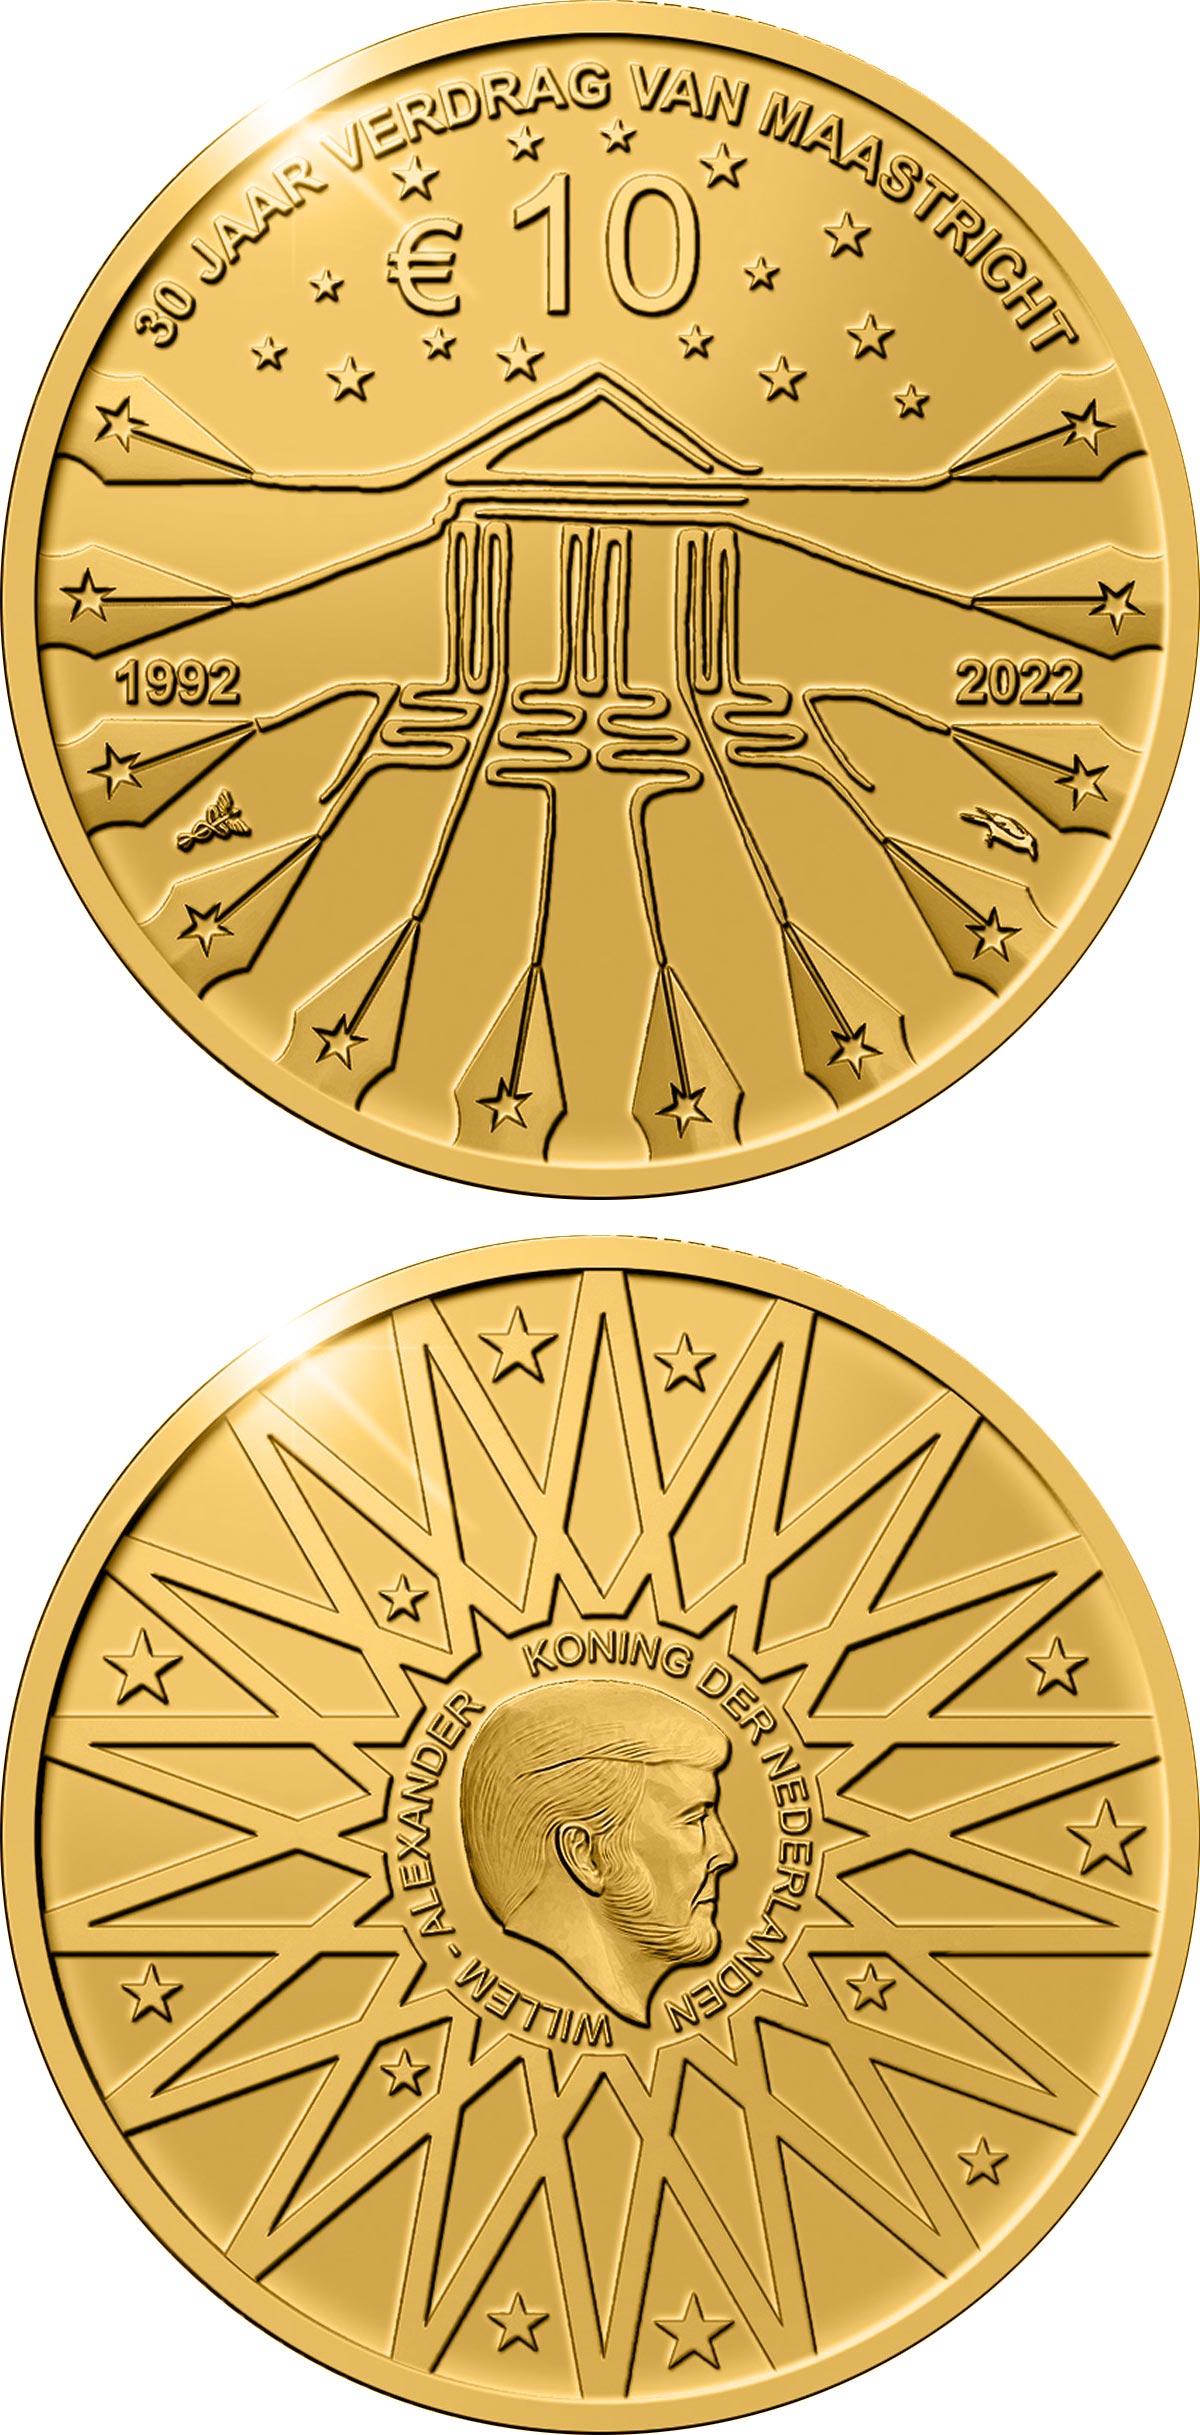 Image of 10 euro coin - 30th anniversary of the Maastricht Treaty | Netherlands 2022.  The Gold coin is of Proof quality.